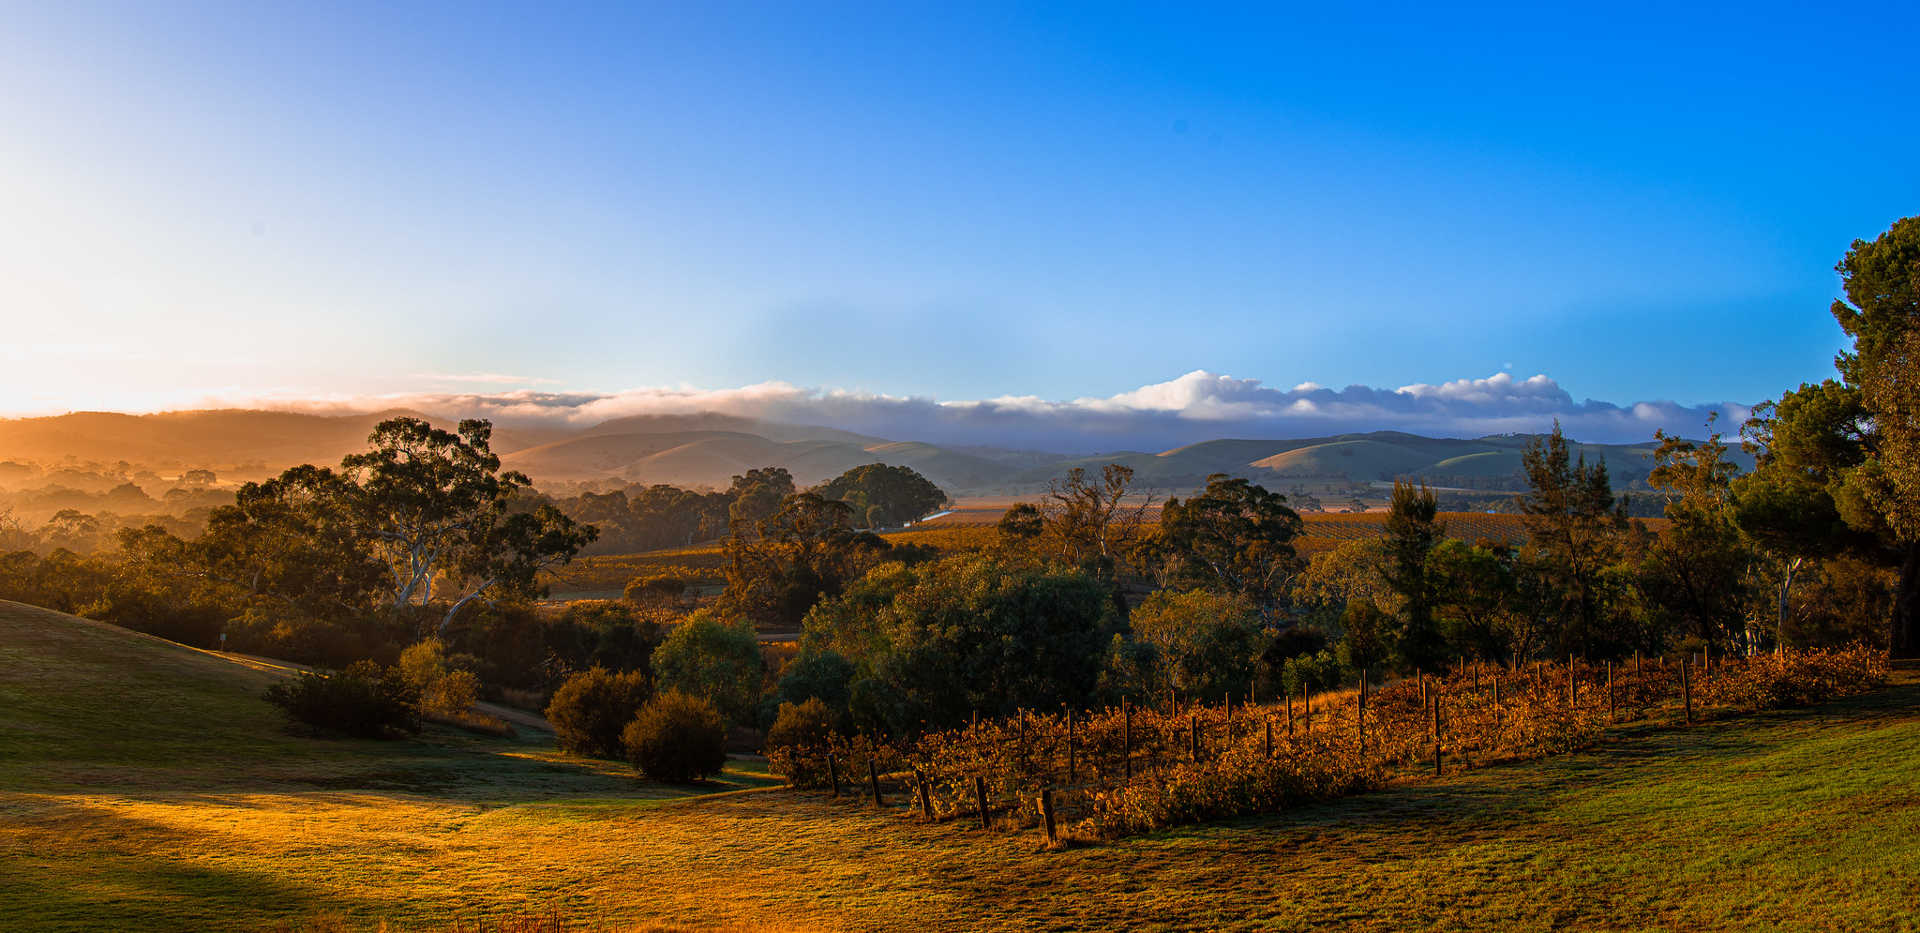 How big is the Barossa Valley?